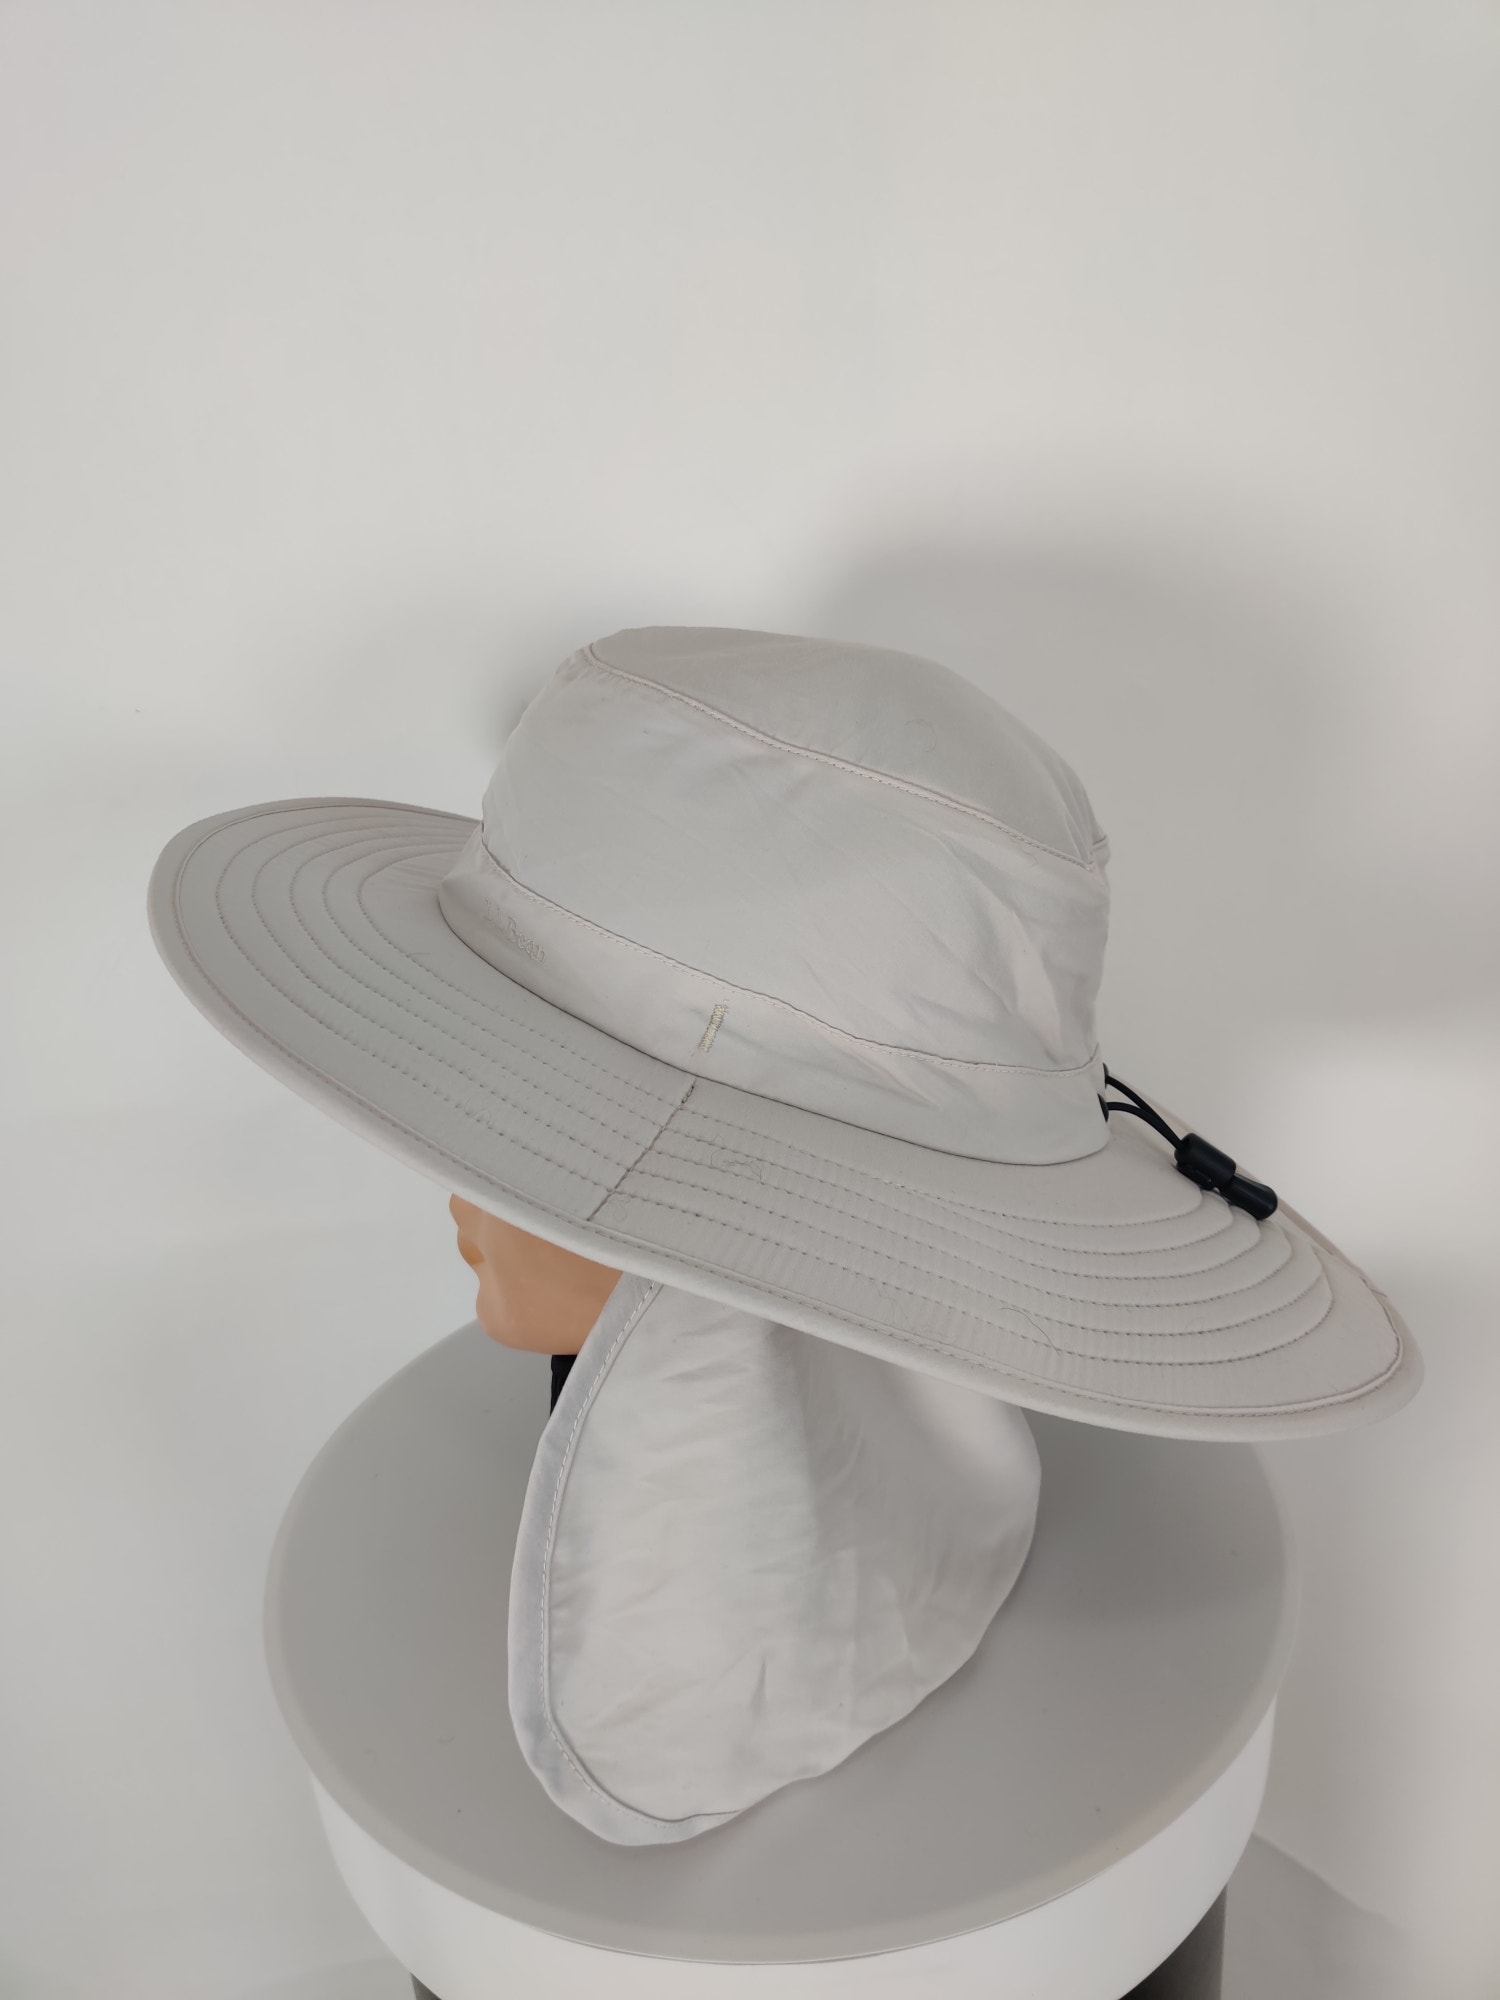 (V) L.L Bean Unisex hat beach hiking summer cream adjustable OS - Picture 12 of 12